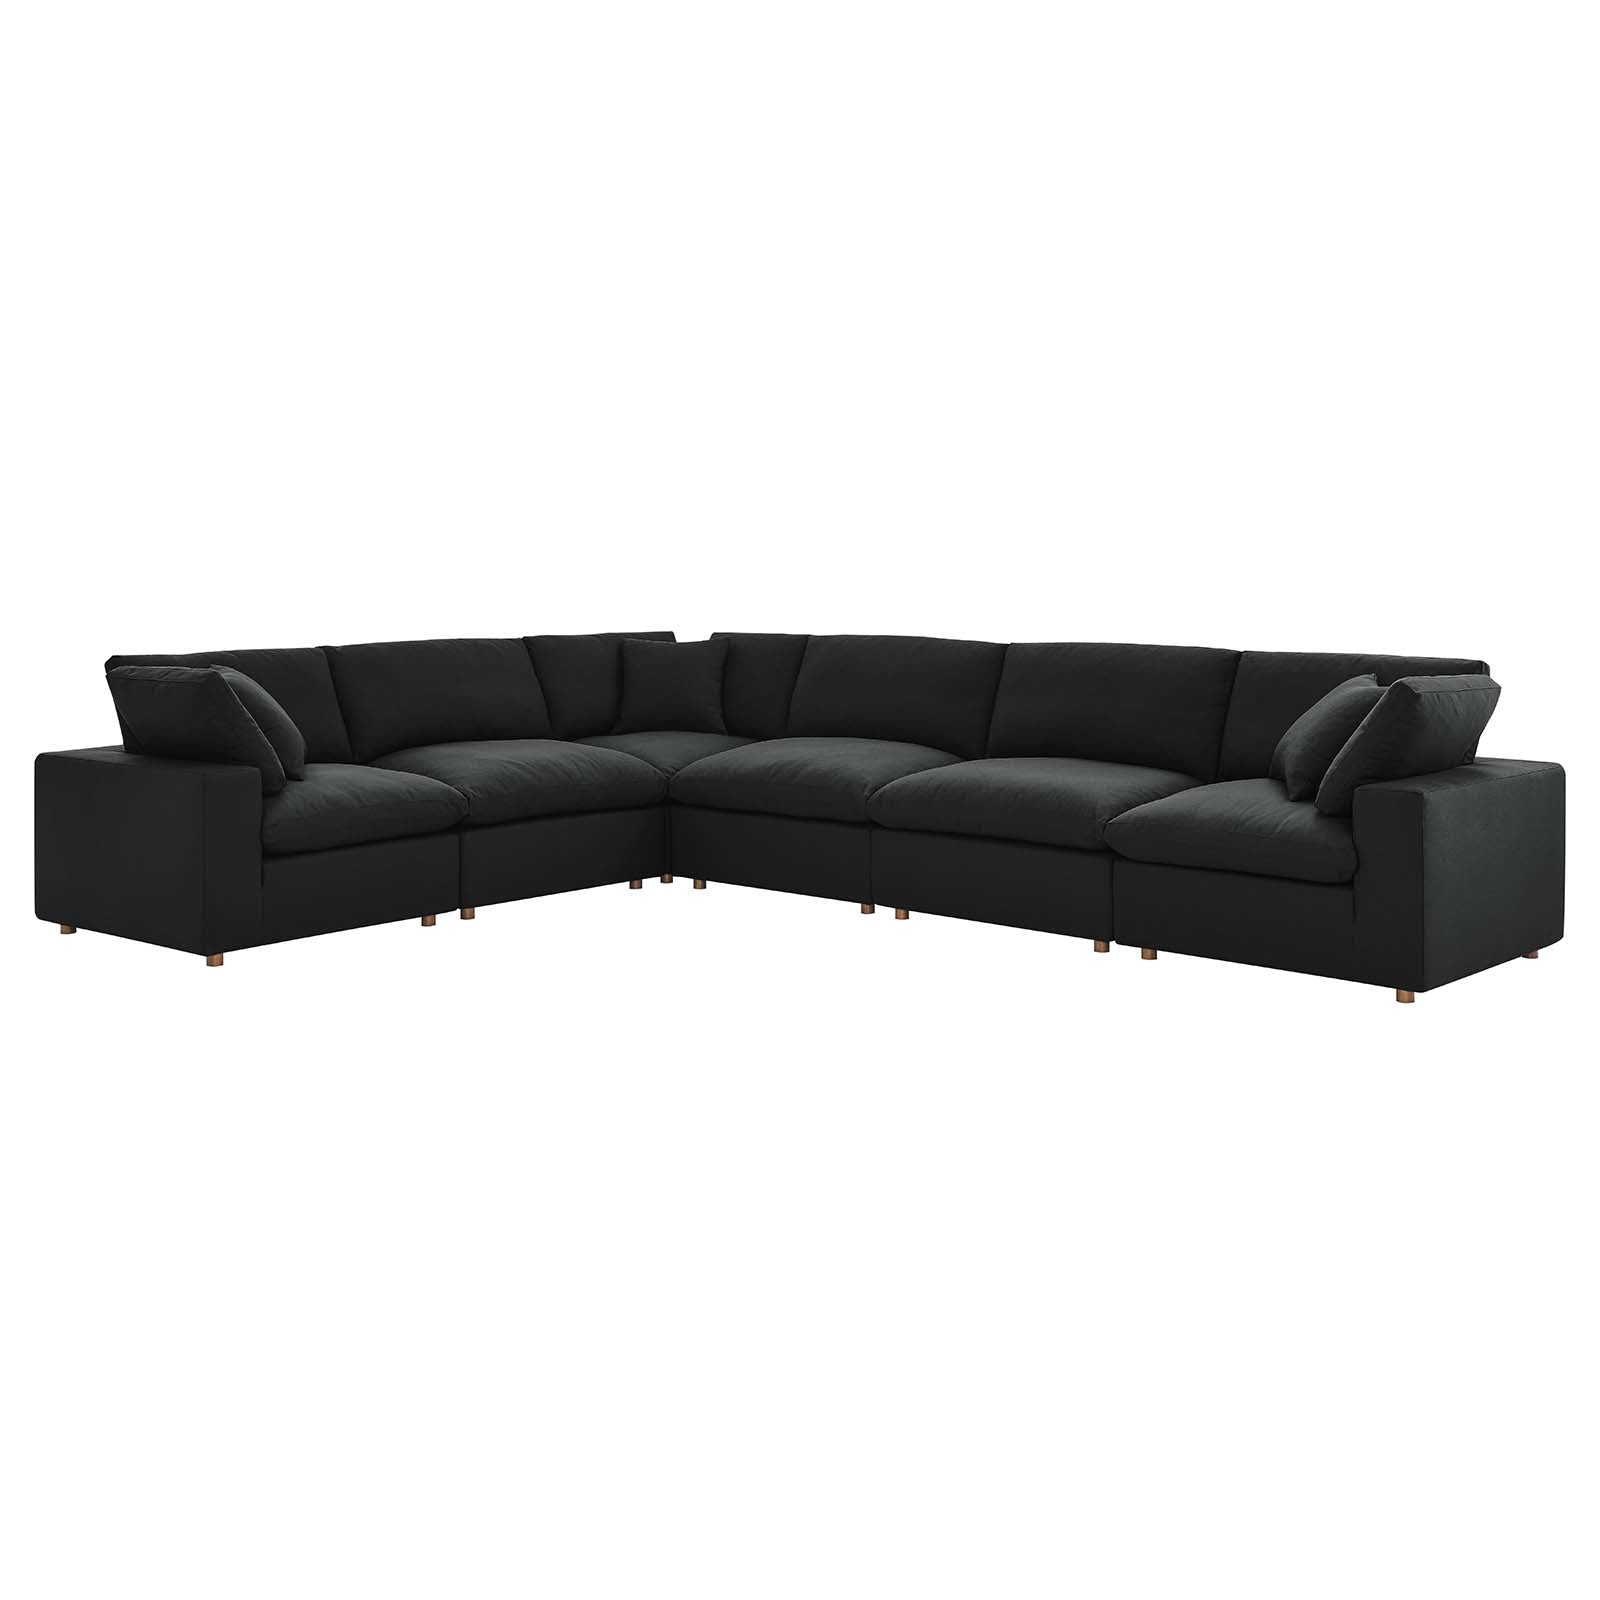 Commix Down Filled Overstuffed 6 Piece Sectional Sofa Set - East Shore Modern Home Furnishings